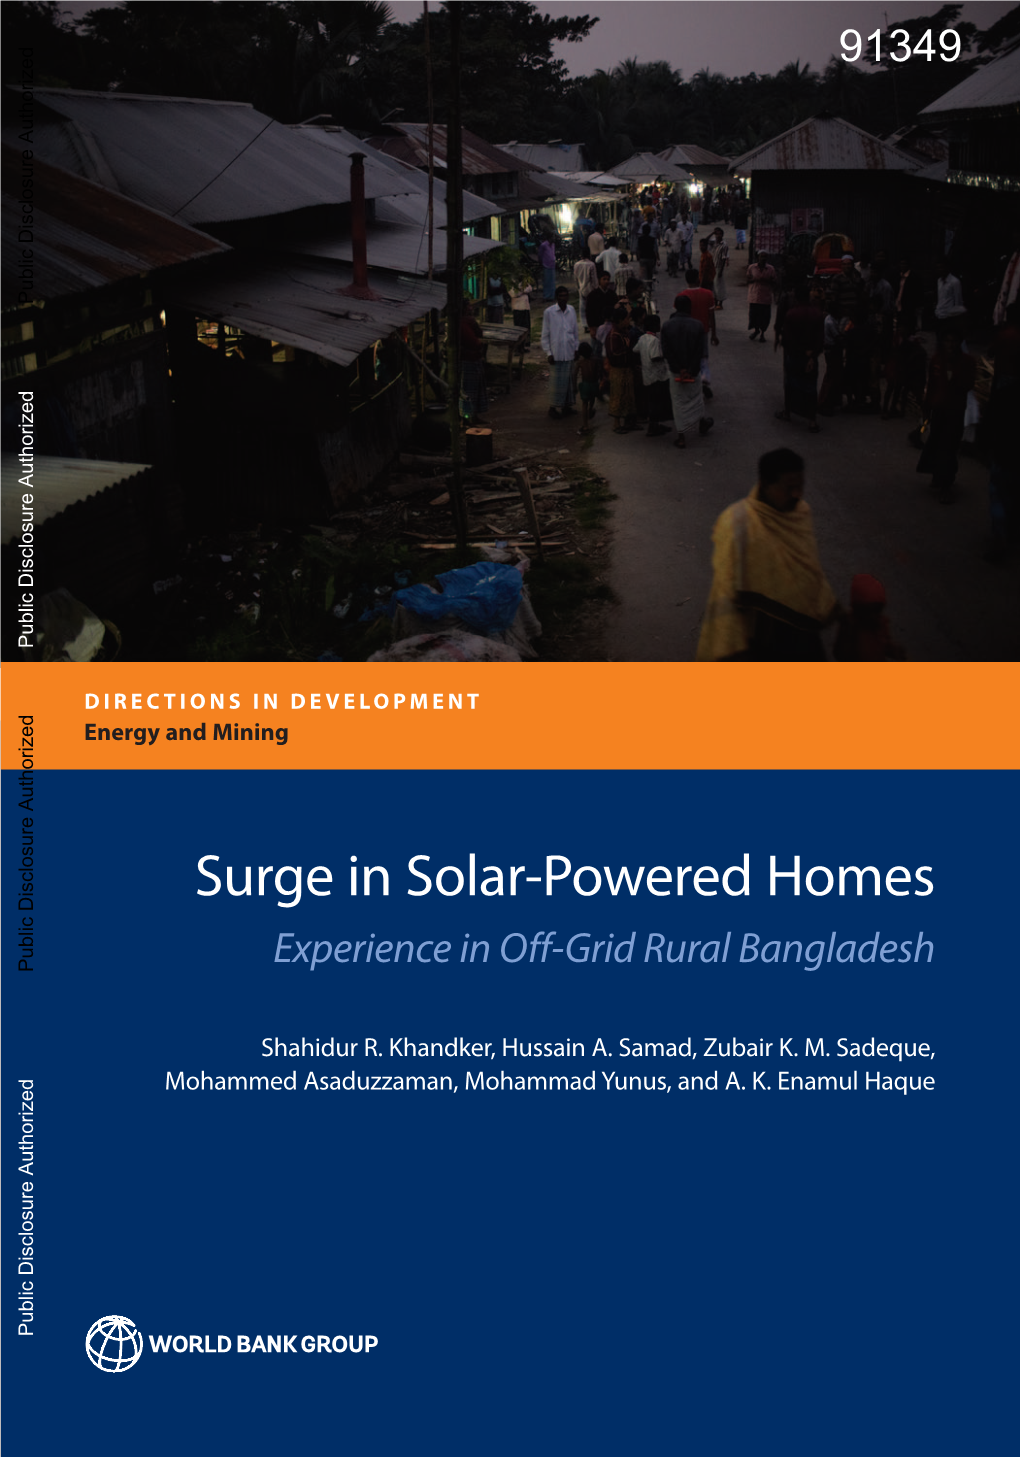 Surge in Solar-Powered Homes: Experience in Off-Grid Rural Bangladesh